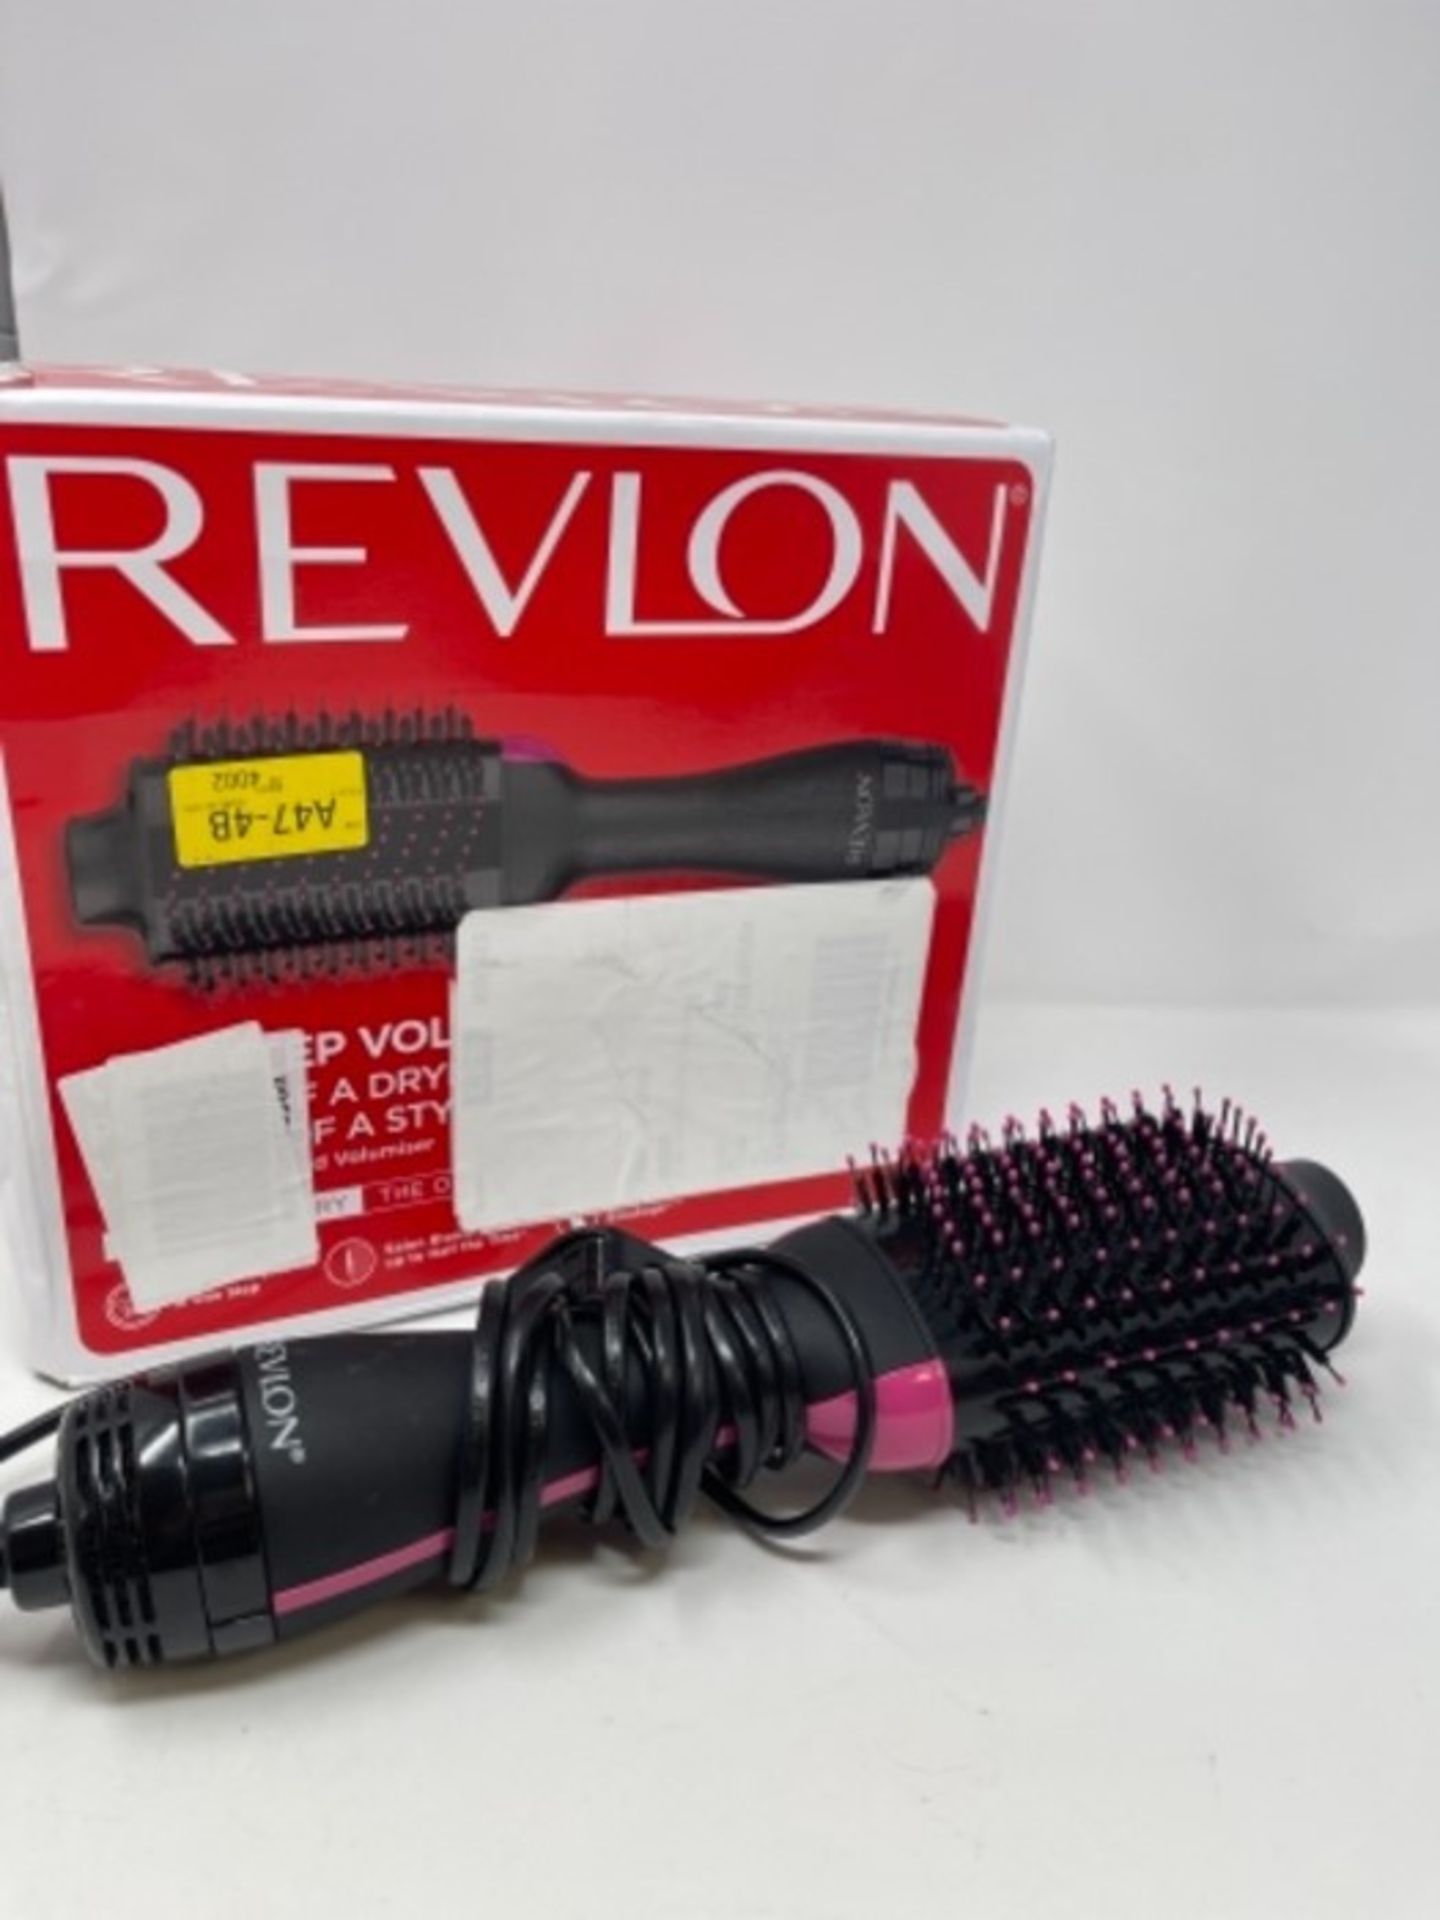 Revlon Salon One- Step Volumizer for mid to long - Image 2 of 2